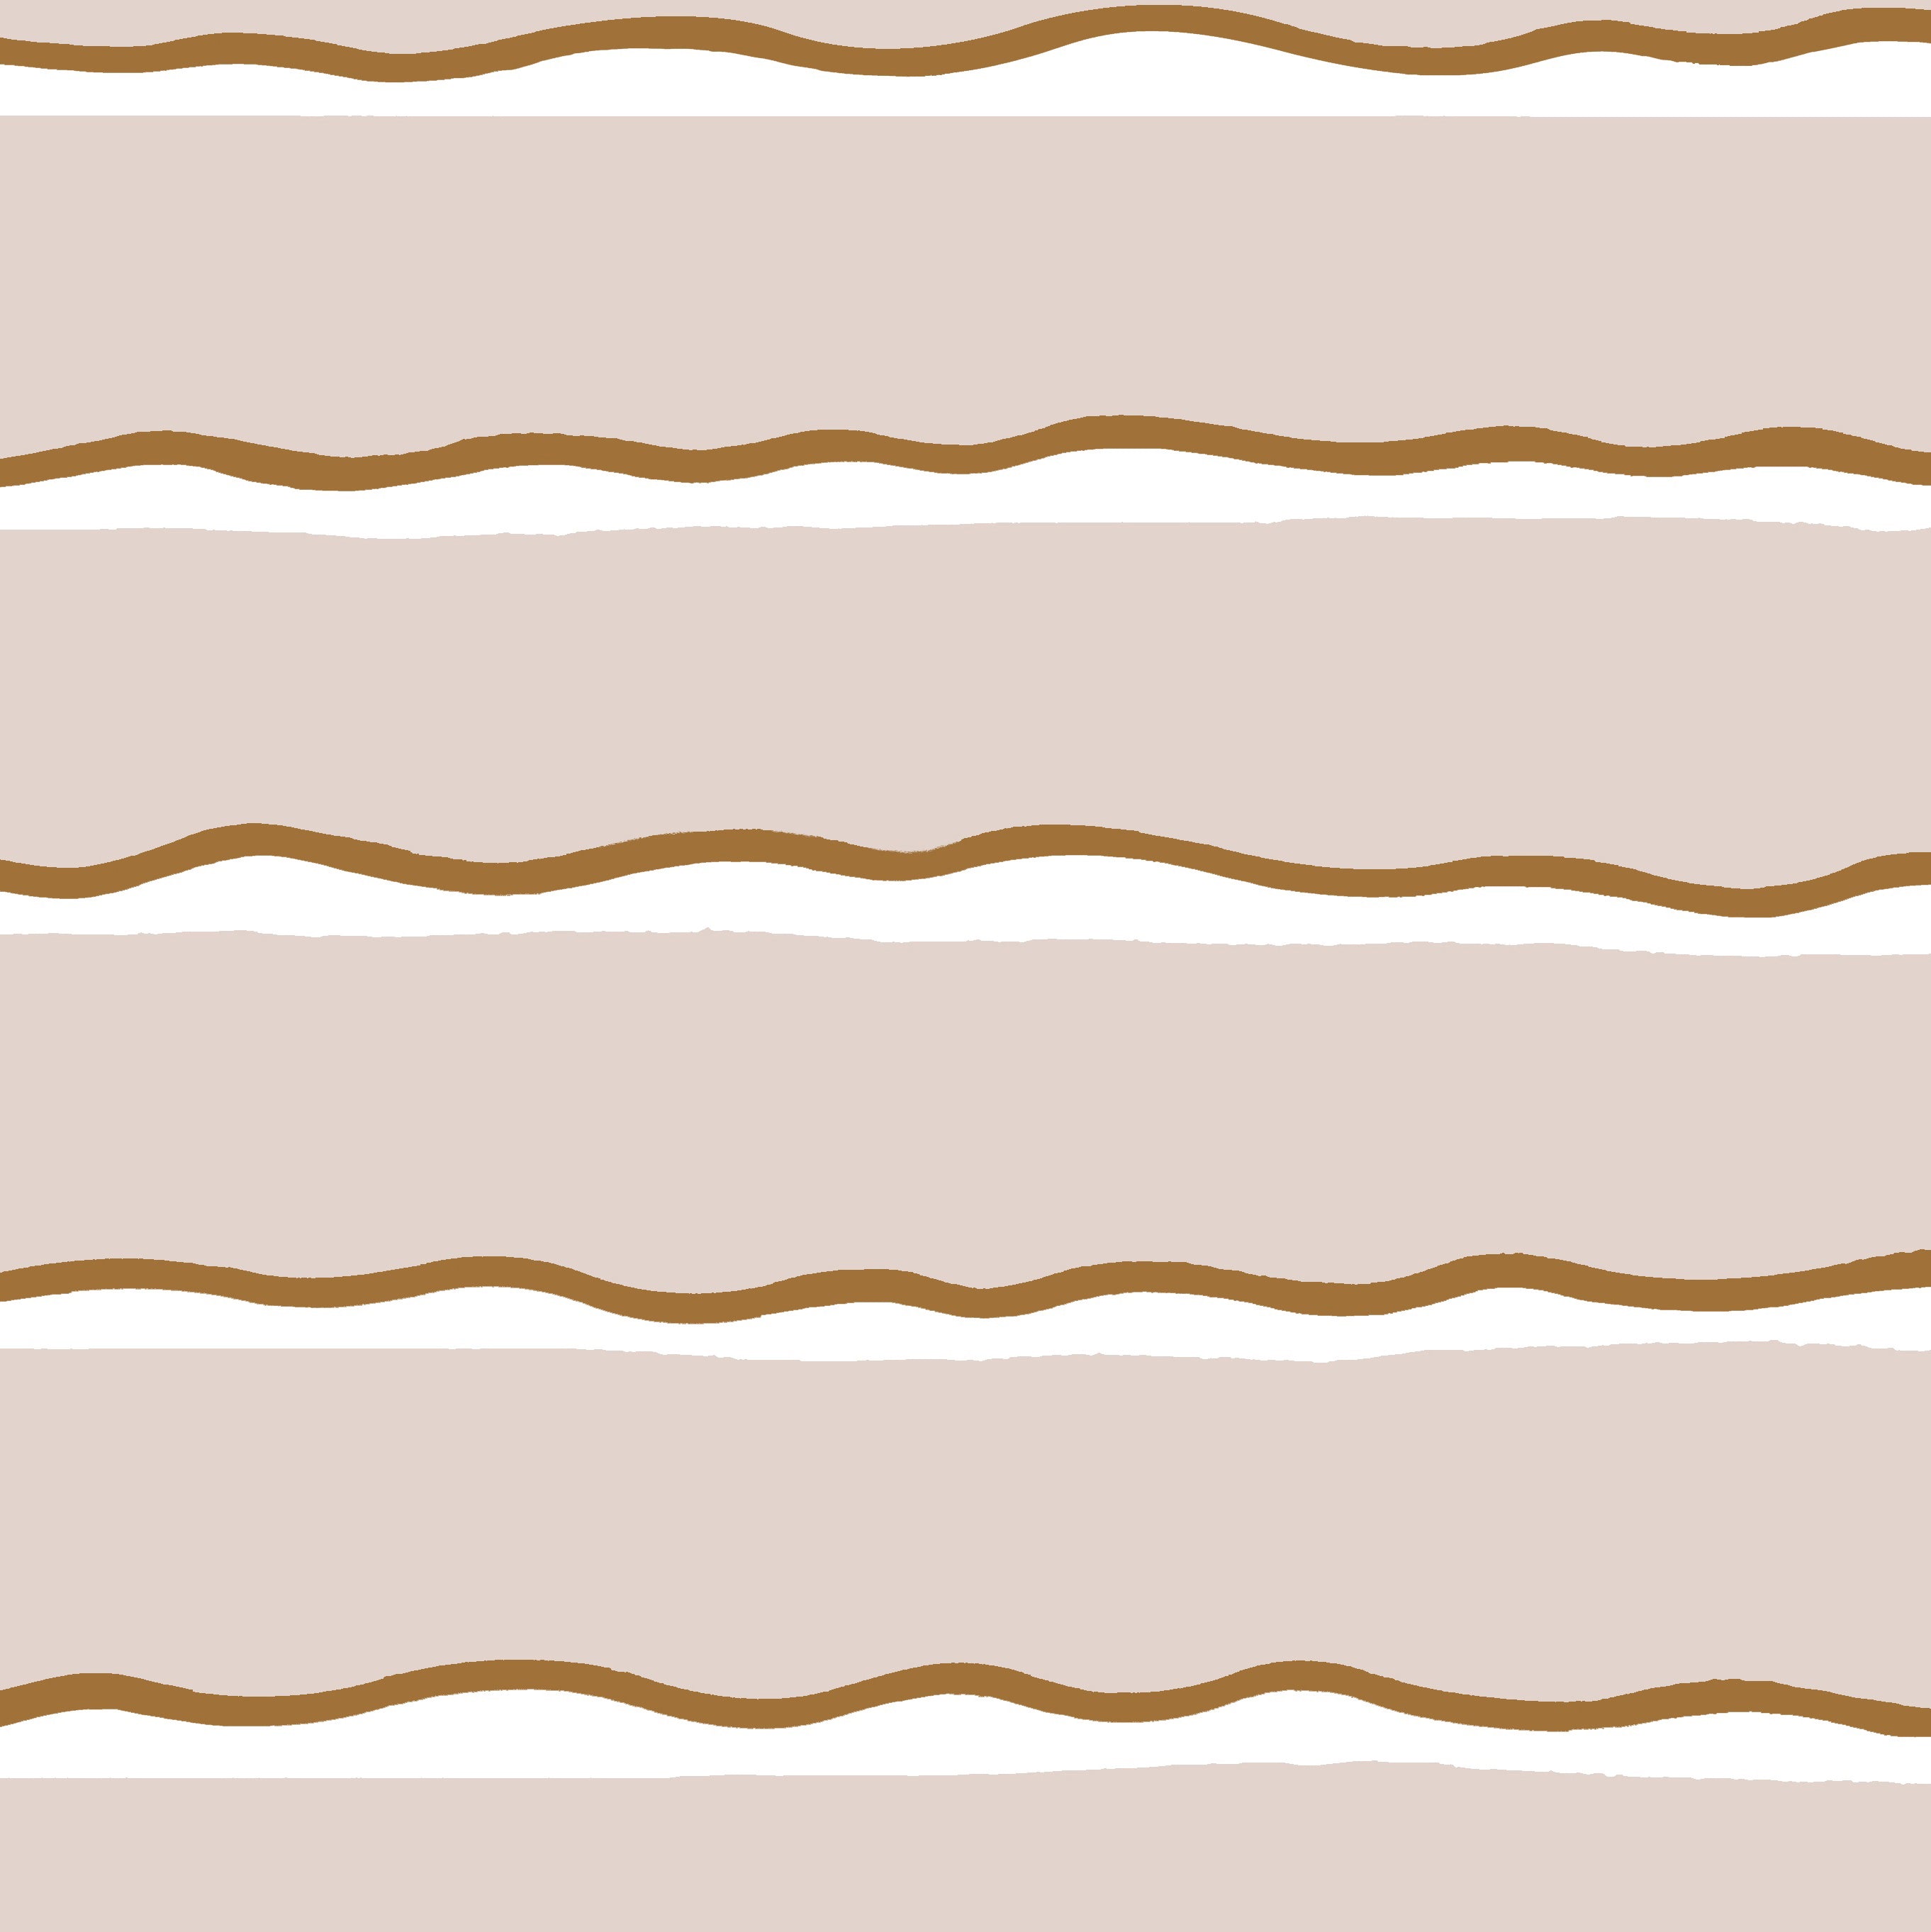 Detail of fabric in a wide undulating stripe pattern in brown and white on a light pink field.